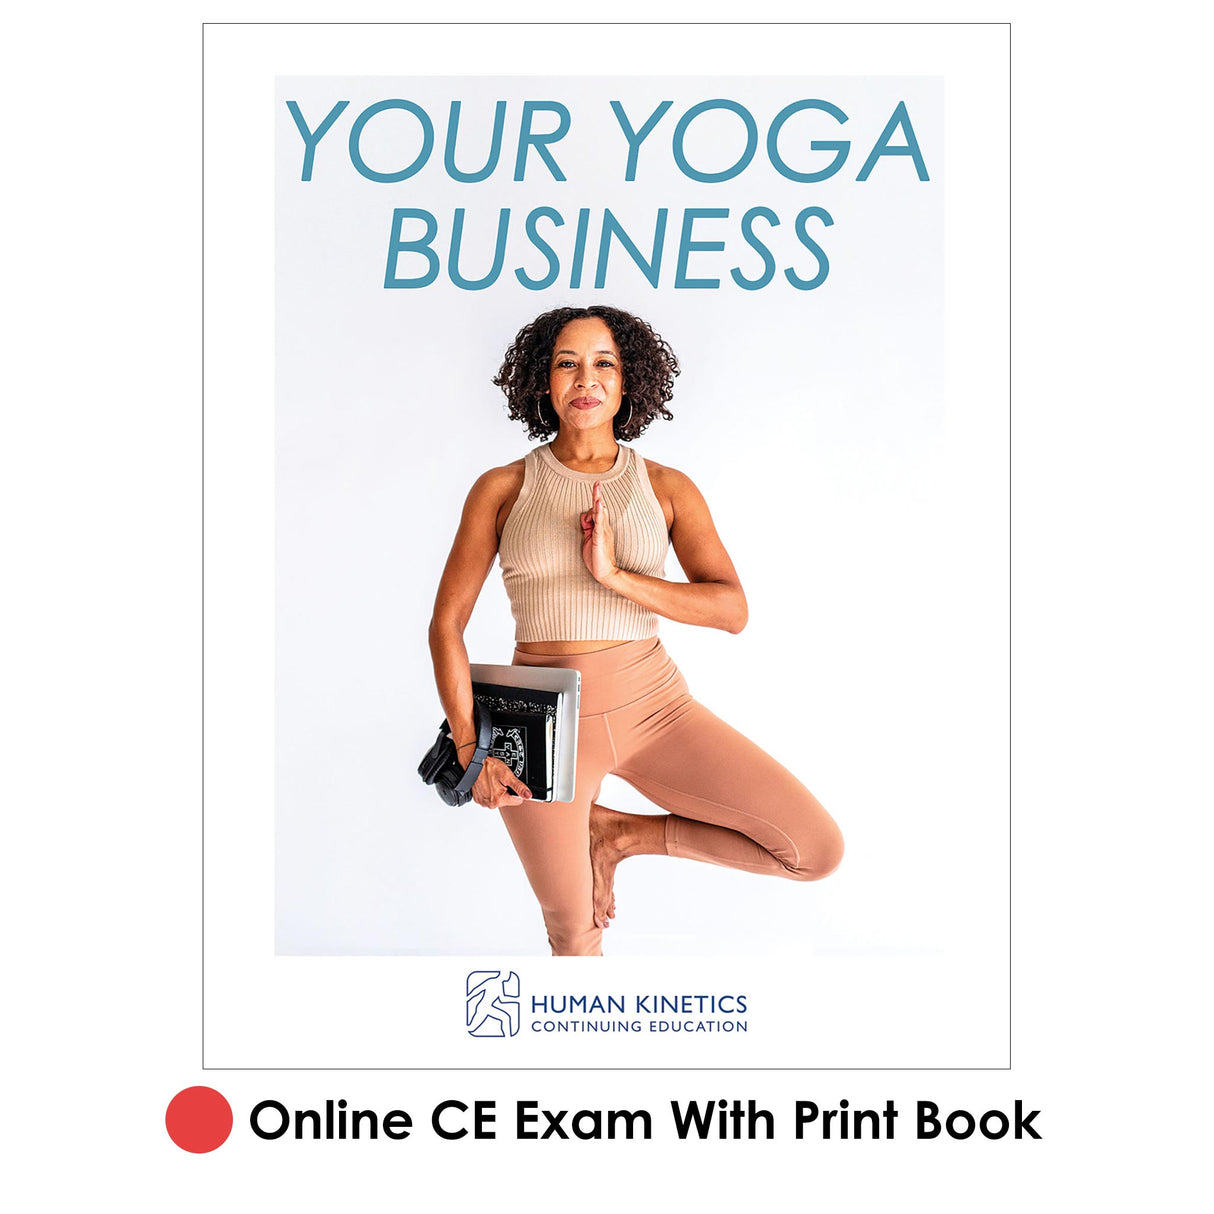 Your Yoga Business Online CE Exam With Print Book